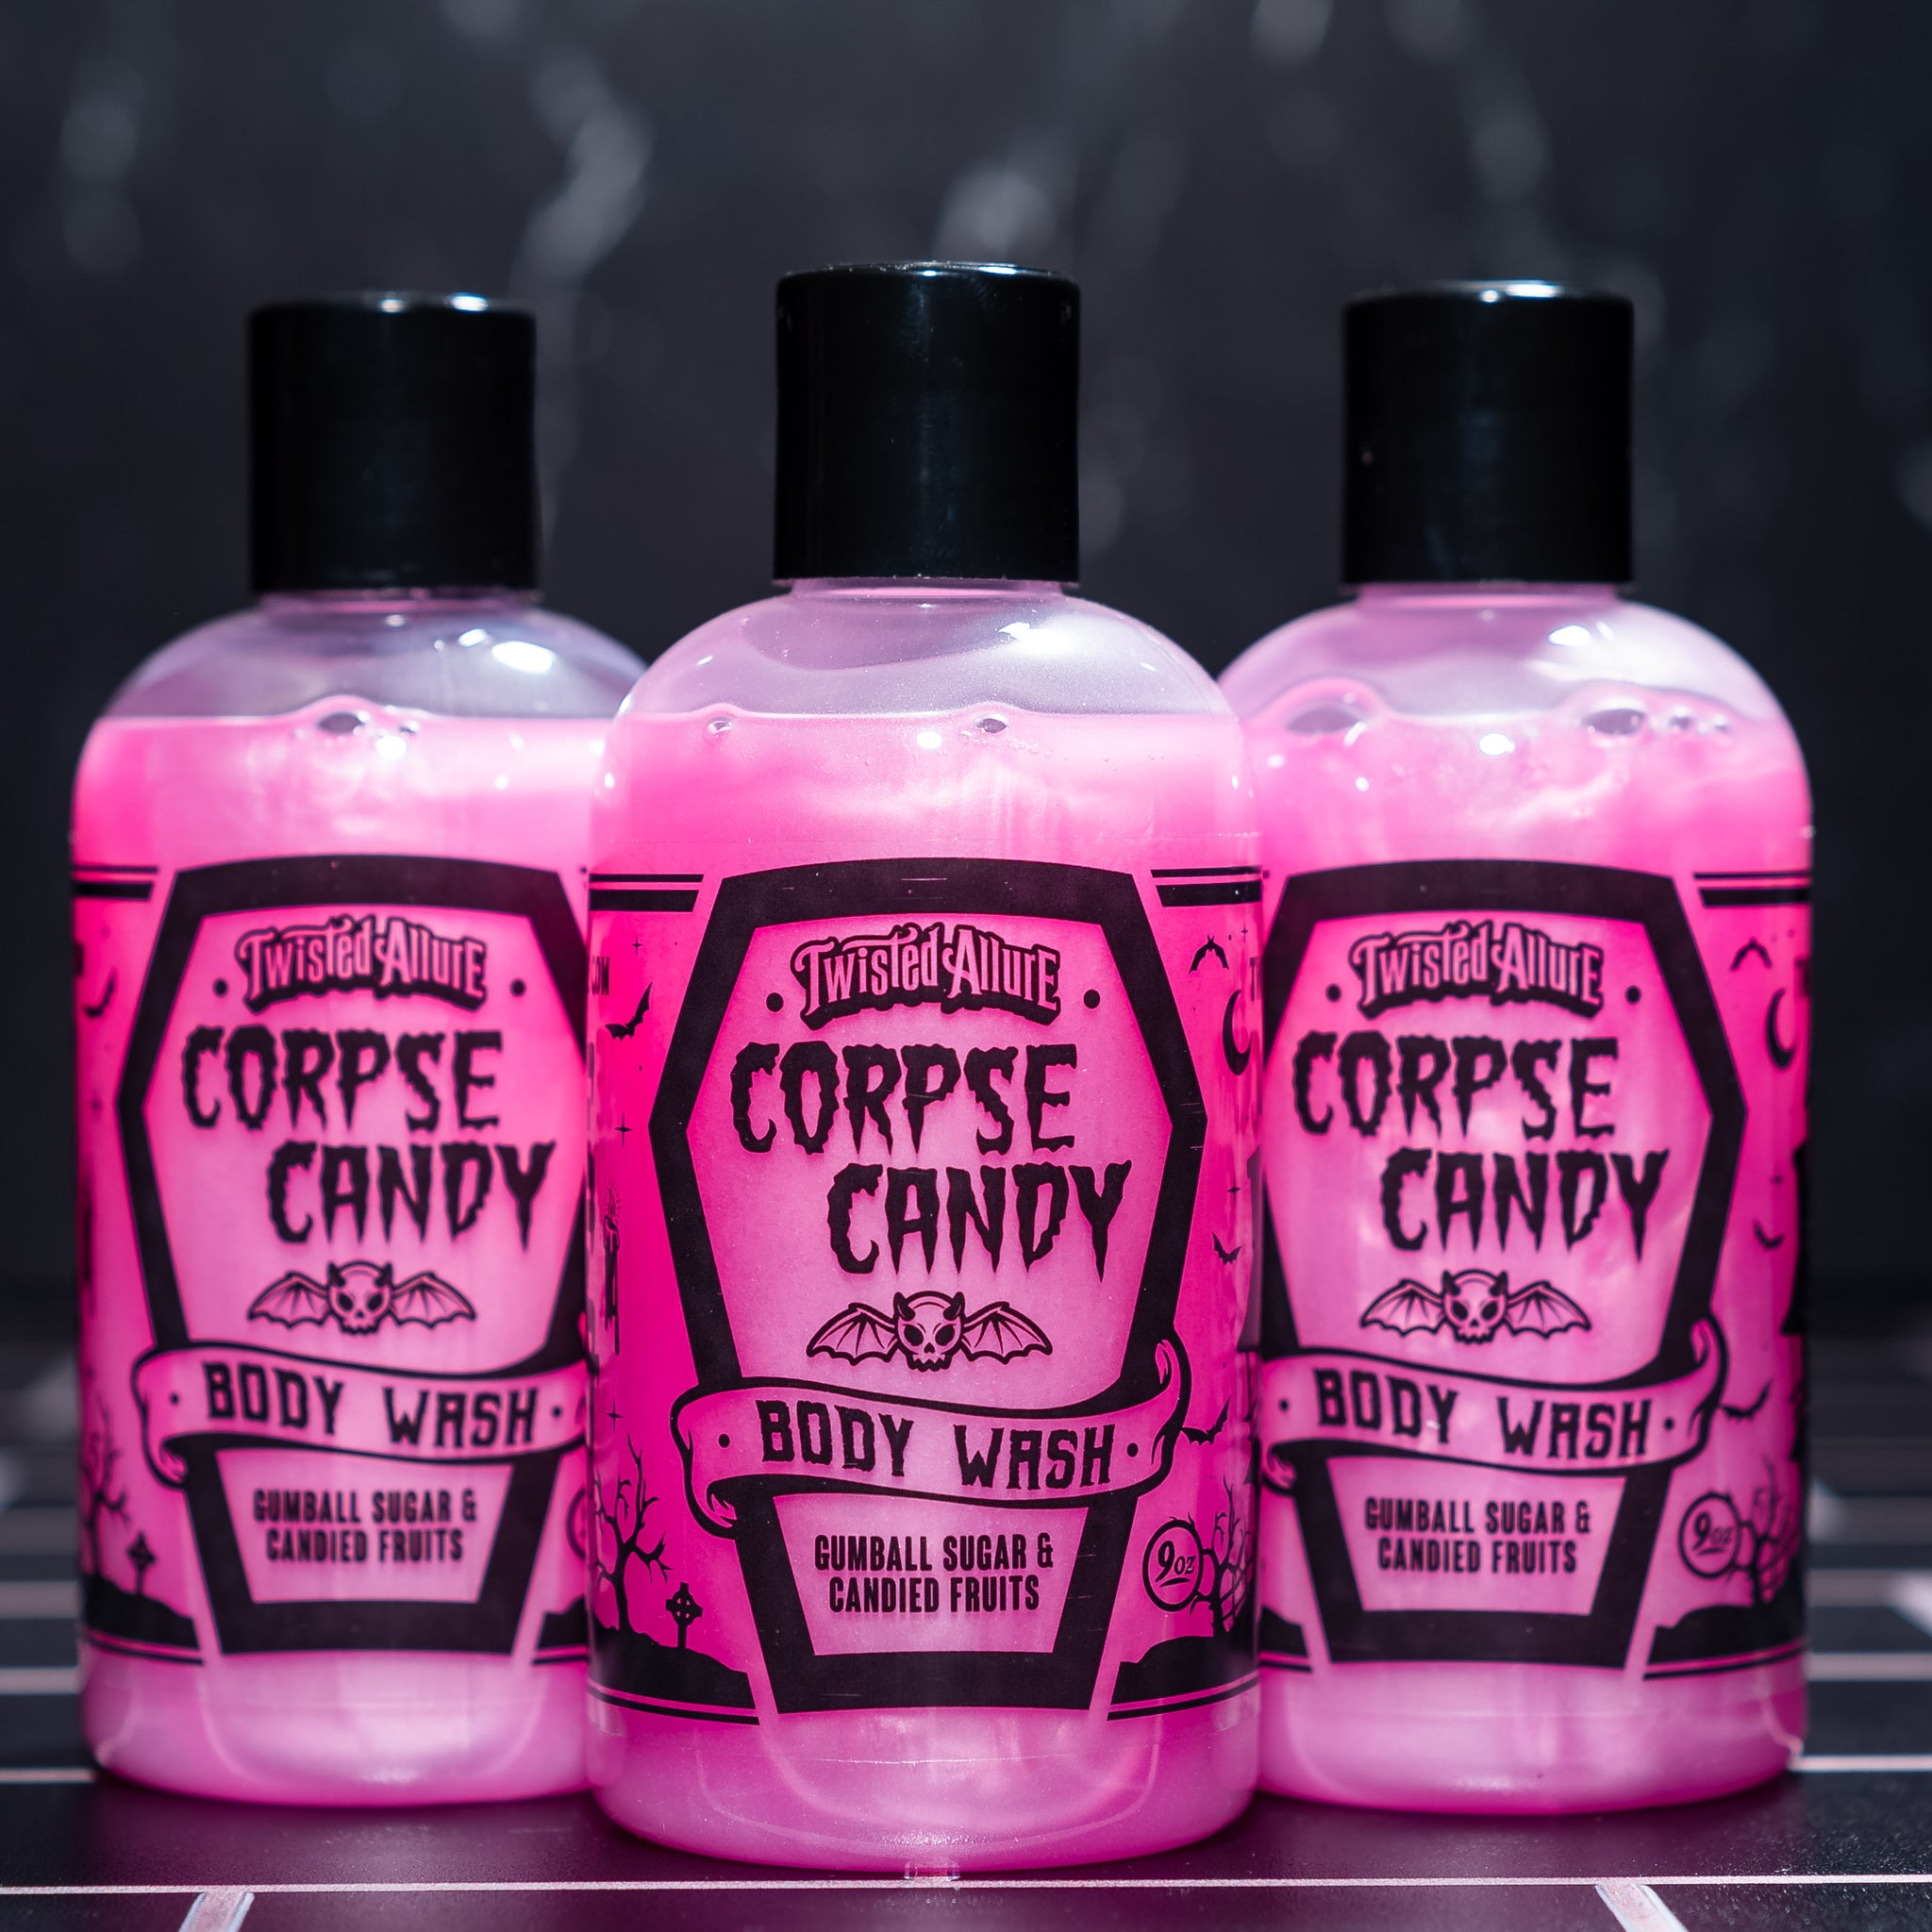 Corpse Candy Body Wash (Gumball sugar & Candy fruits)